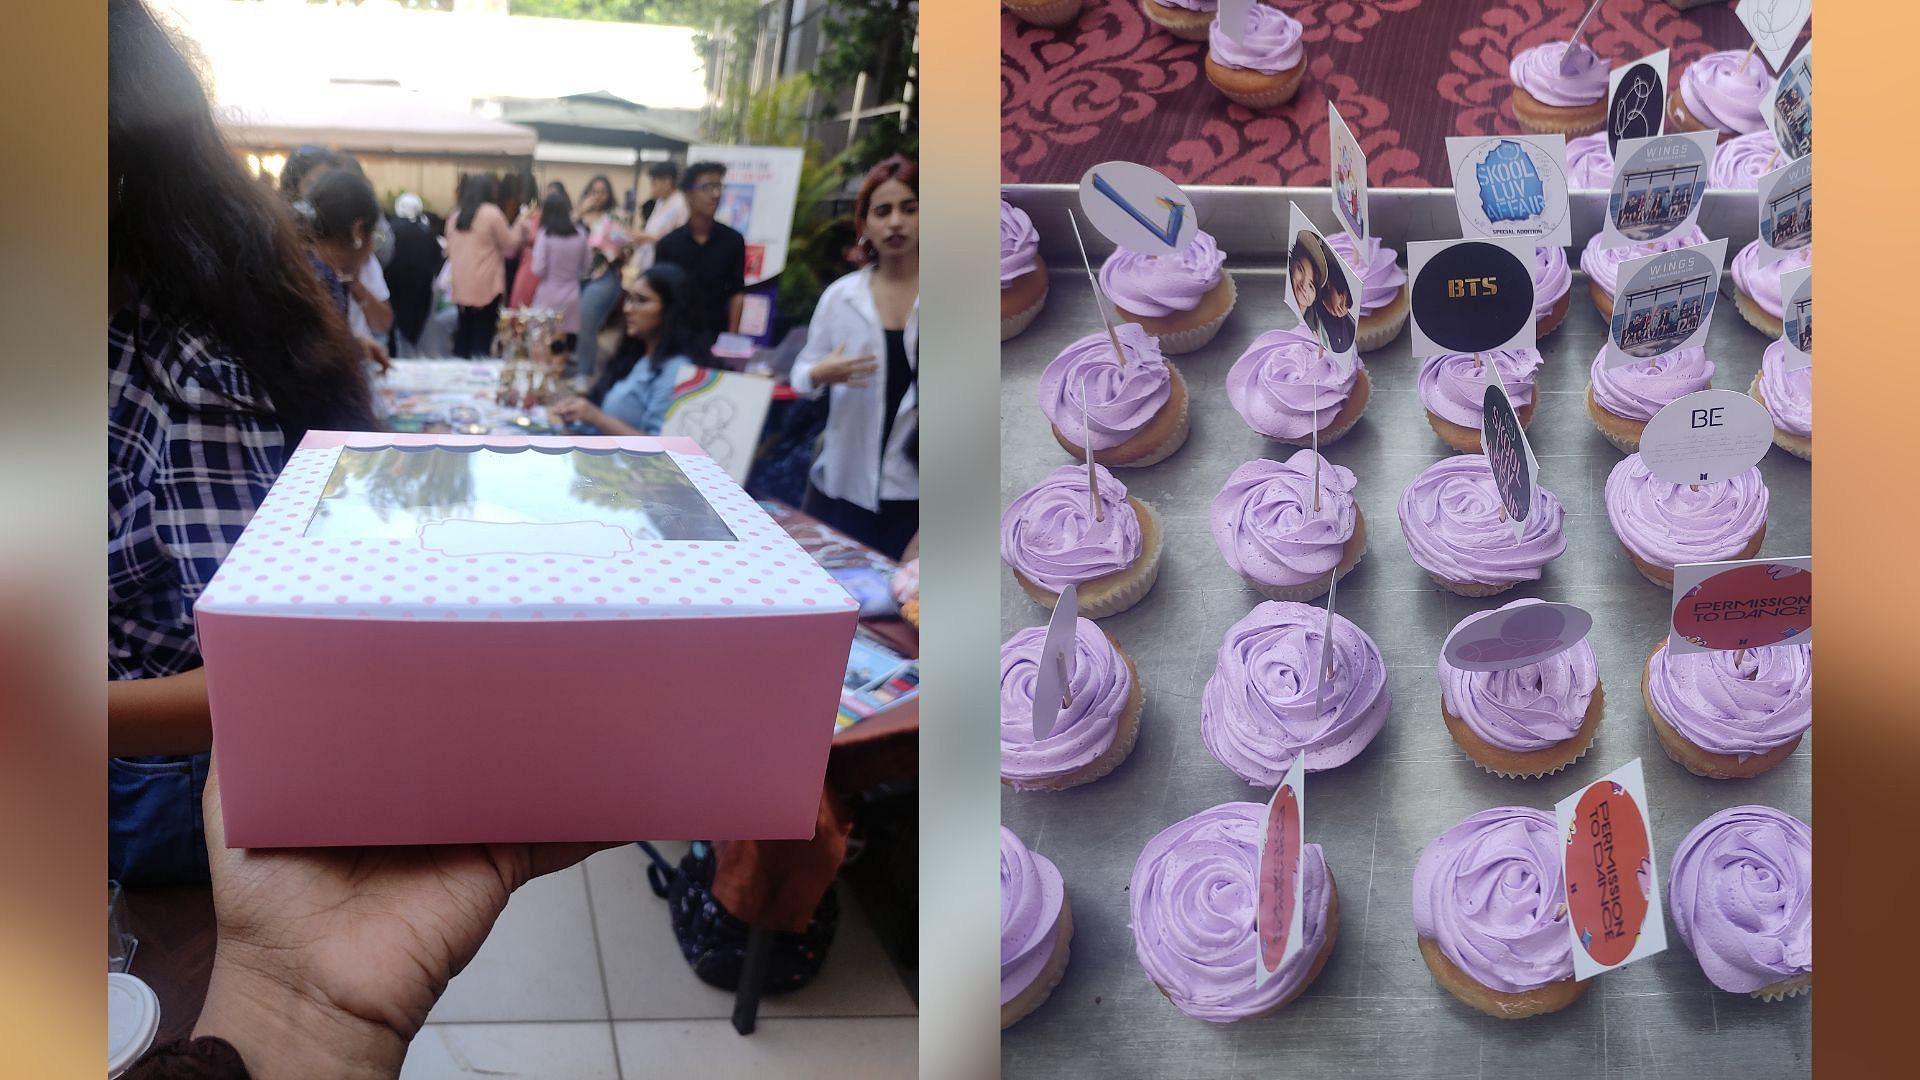 The food boxes and cupcakes that were provided at the We are Bulletproof event (Image via thehallyustore)